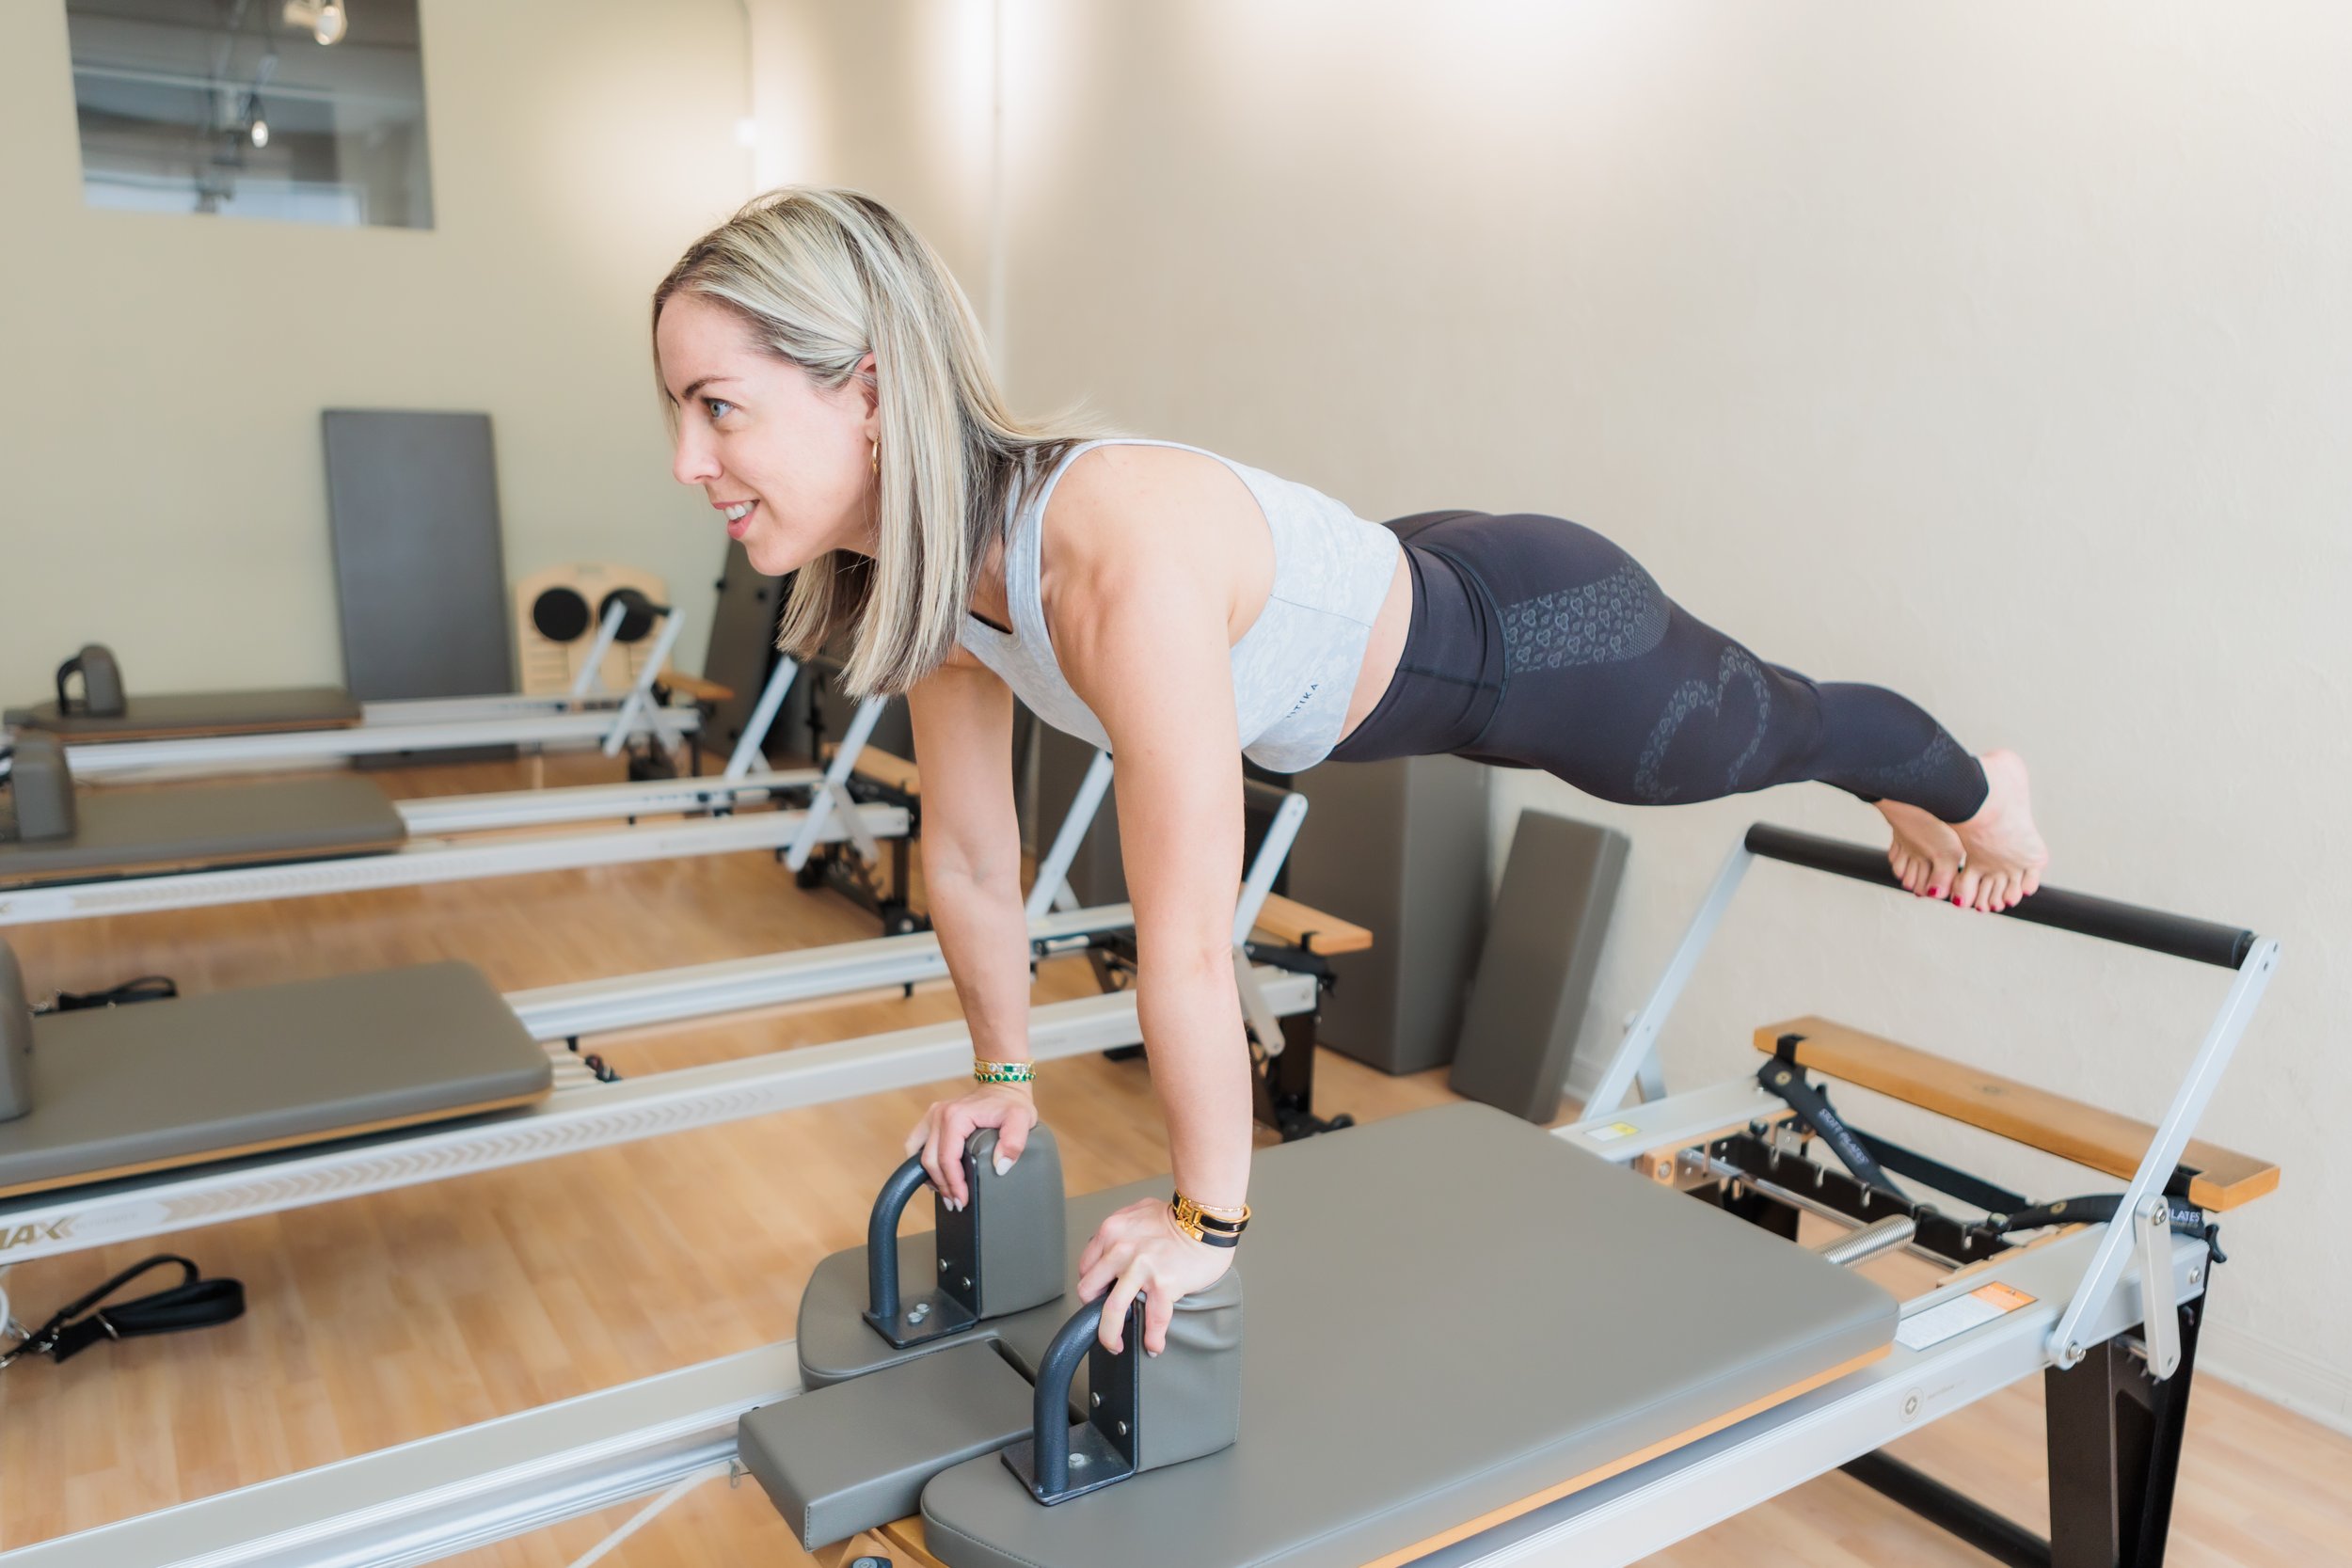 Imprint Pilates - About — Imprint Pilates – Private/Semi-Private Pilates,  Small Group Classes - Downtown Toronto